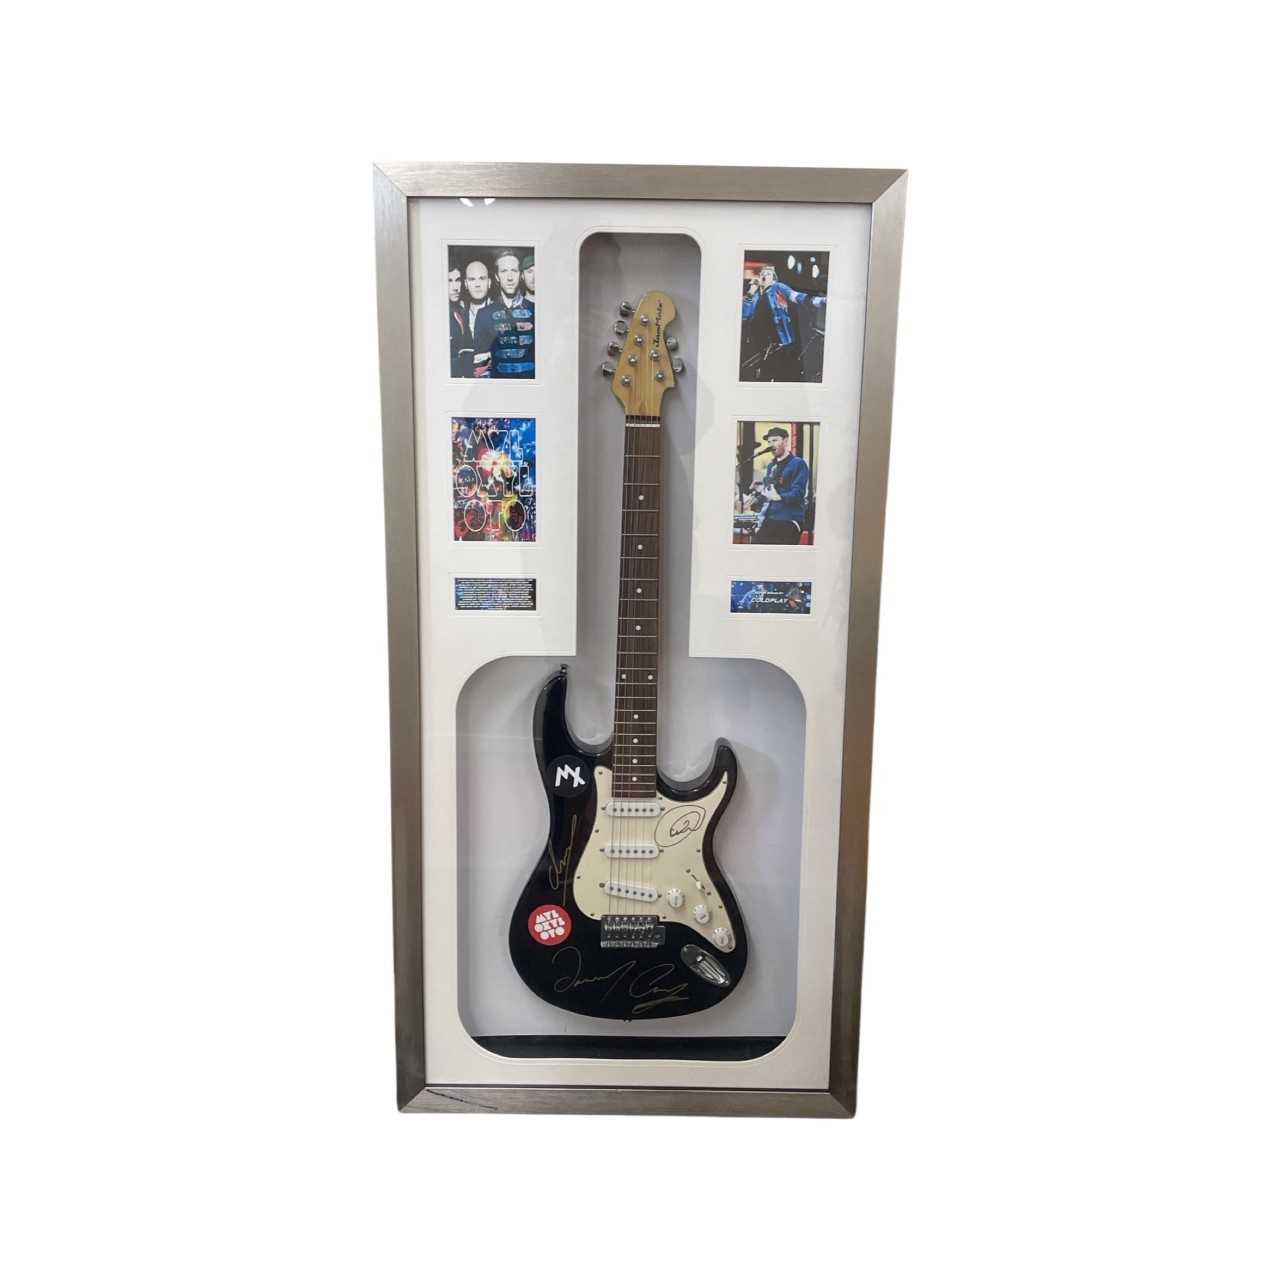 A framed electric guitar signed in gold pen by Coldplay, with promotional photographs for their 2011